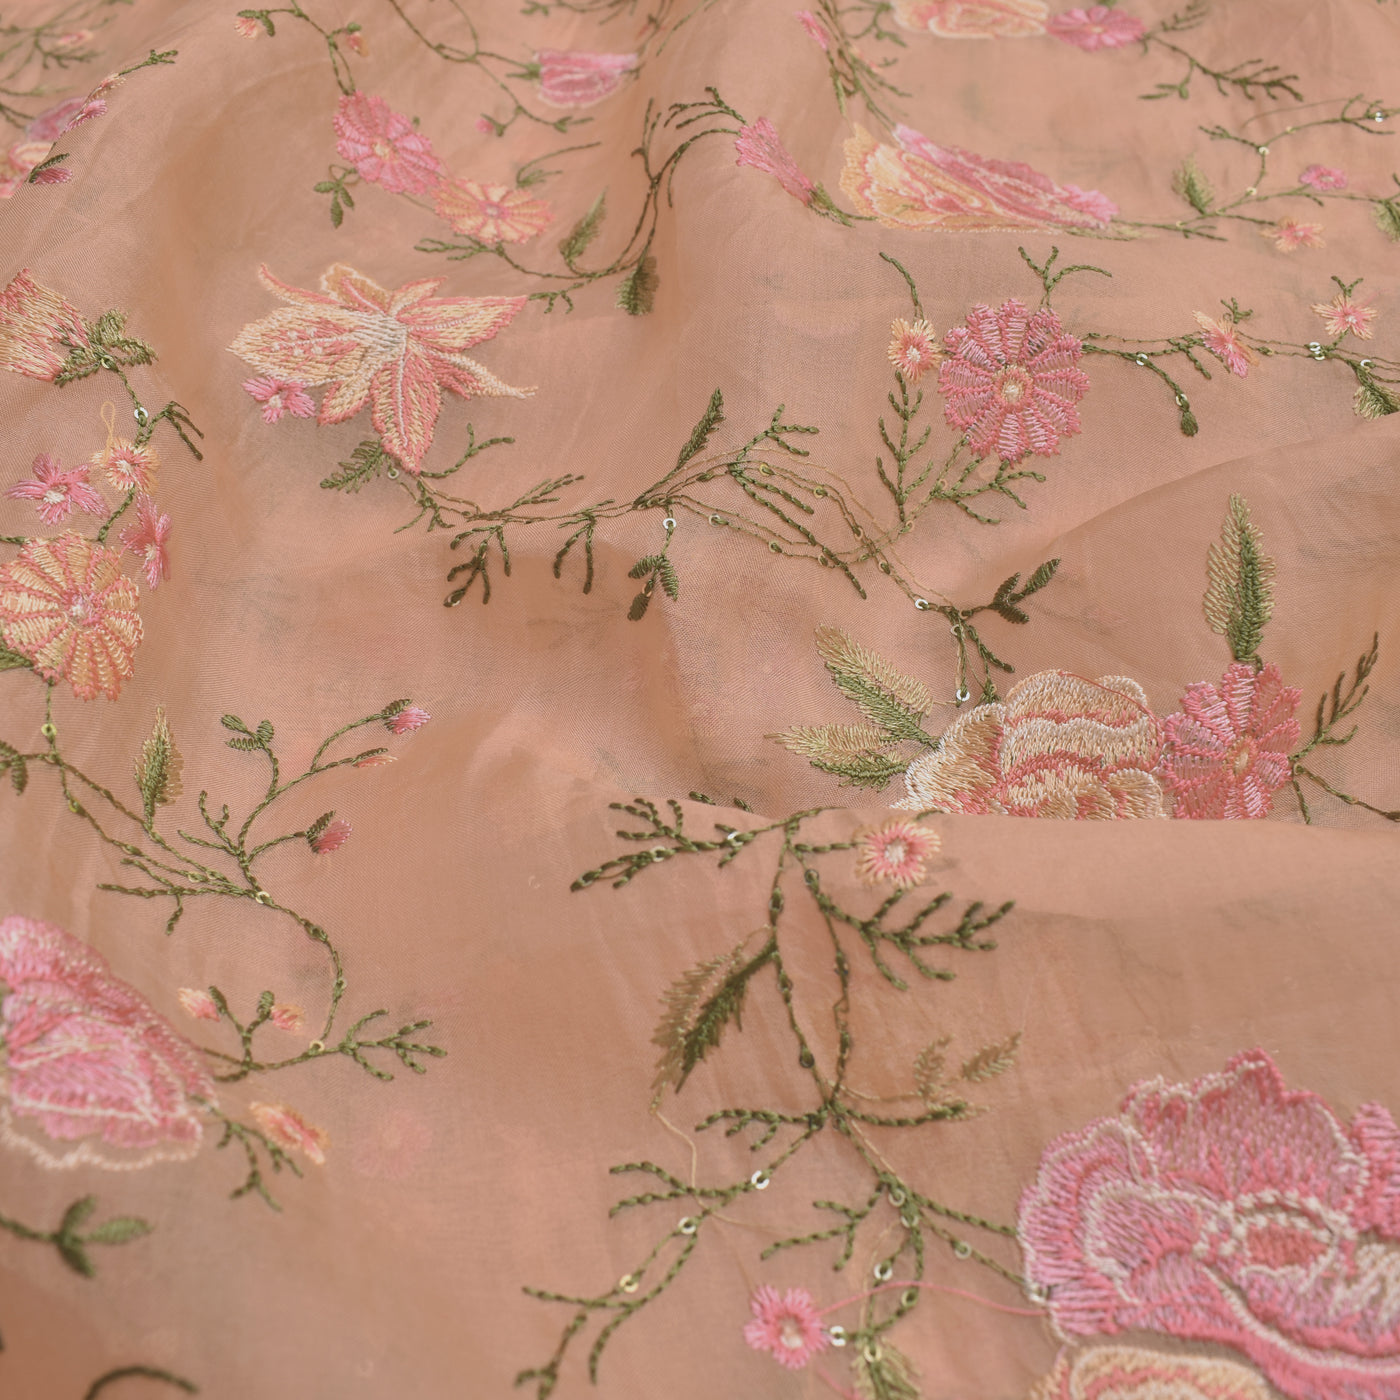 Peach Organza Fabric with Floral Creeper Embroidery Design